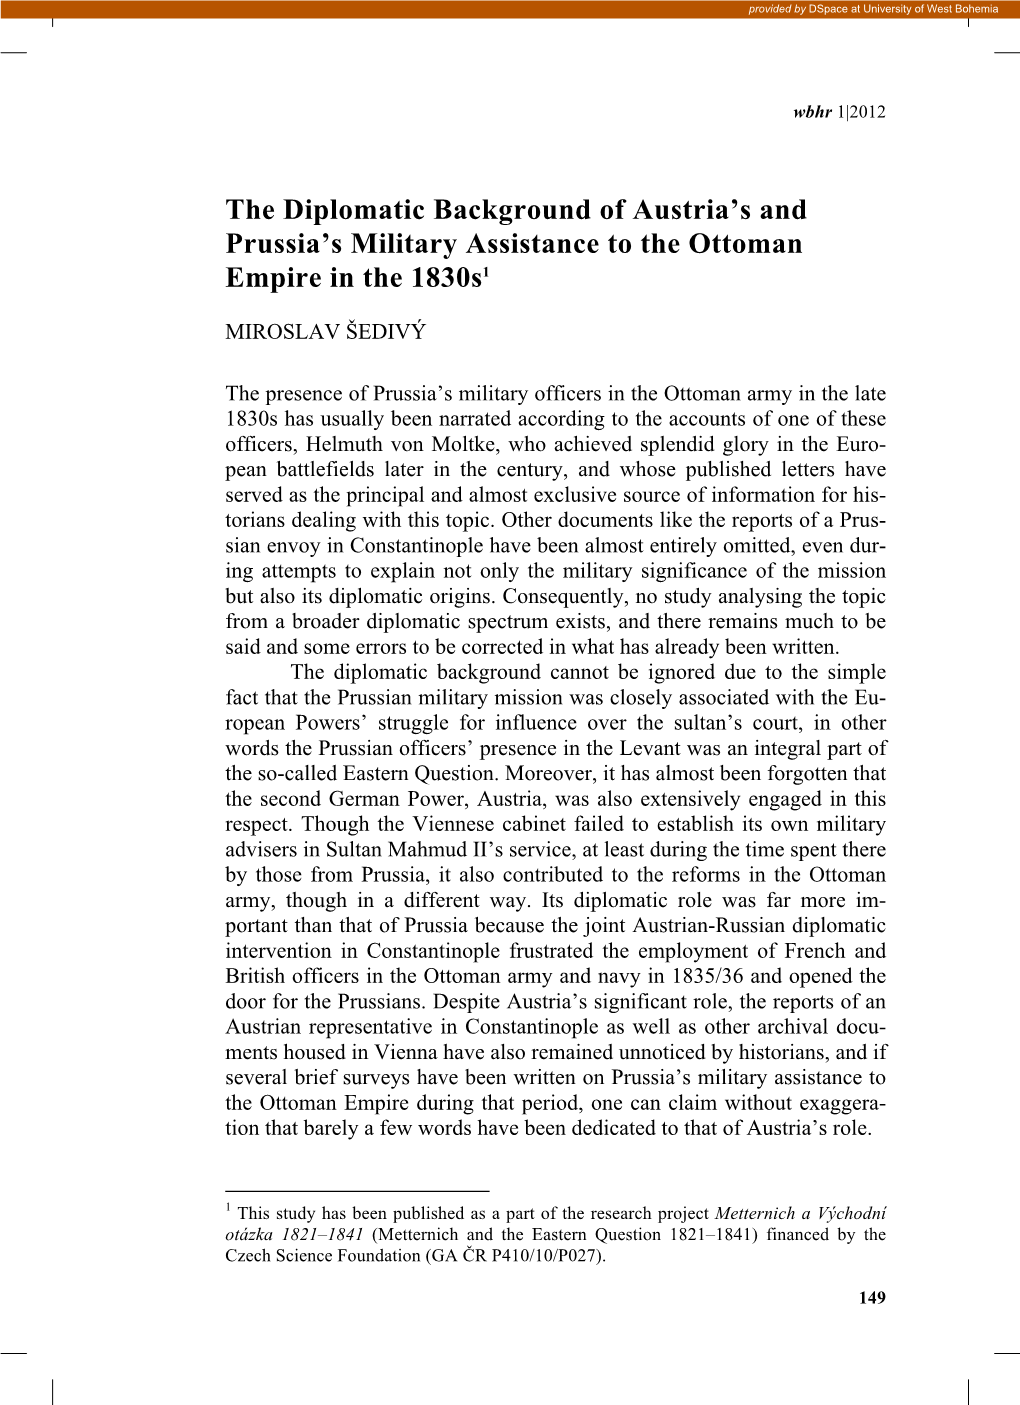 The Diplomatic Background of Austria's and Prussia's Military